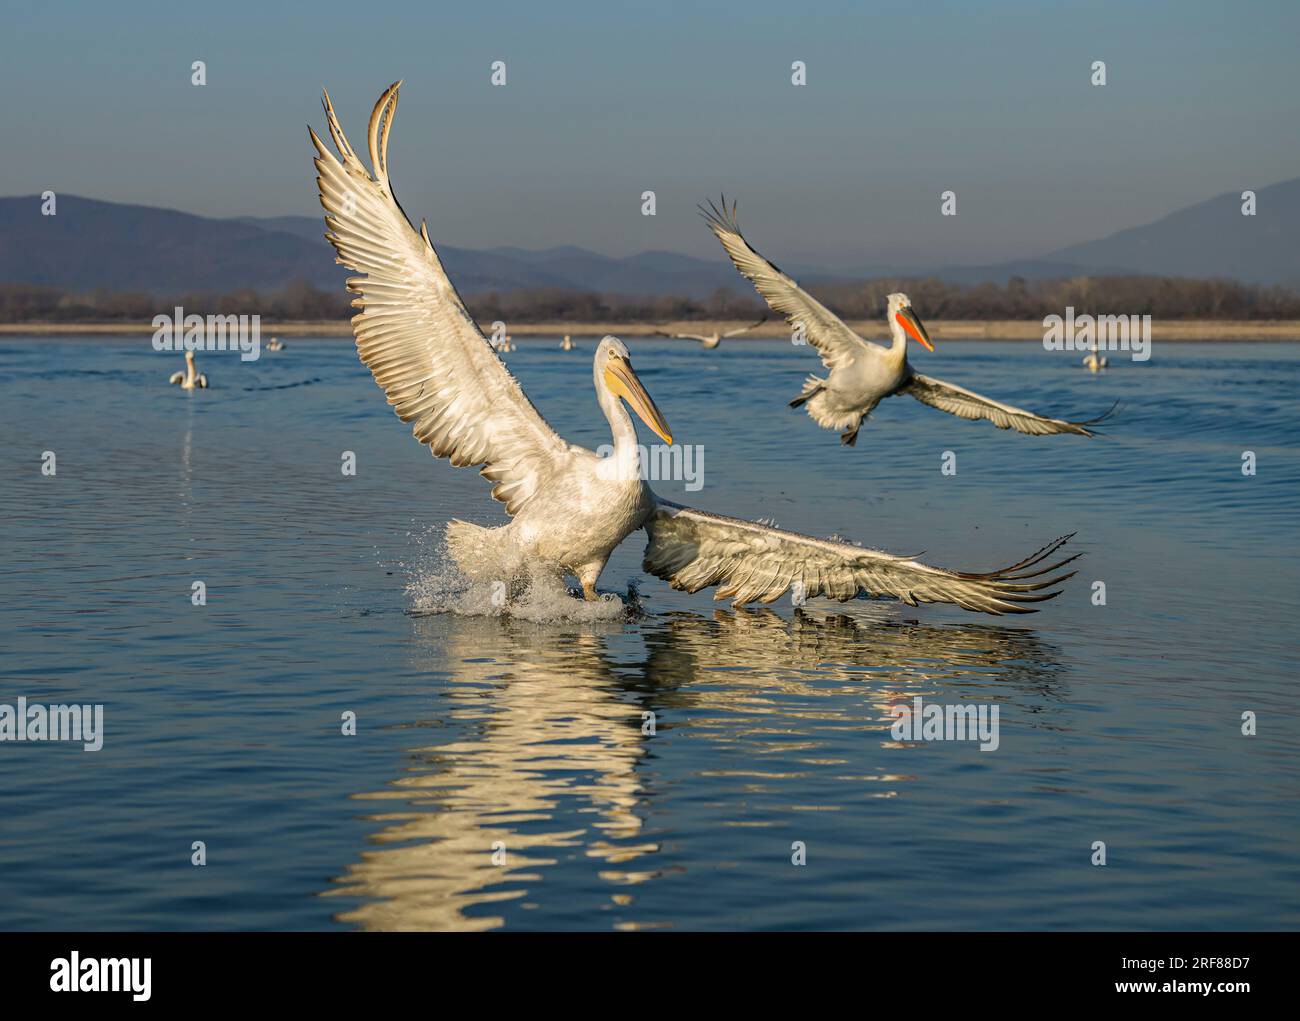 Great White Pelican and Dalmation Pelican Flying in to land on Lake Kerkini, Greece Stock Photo